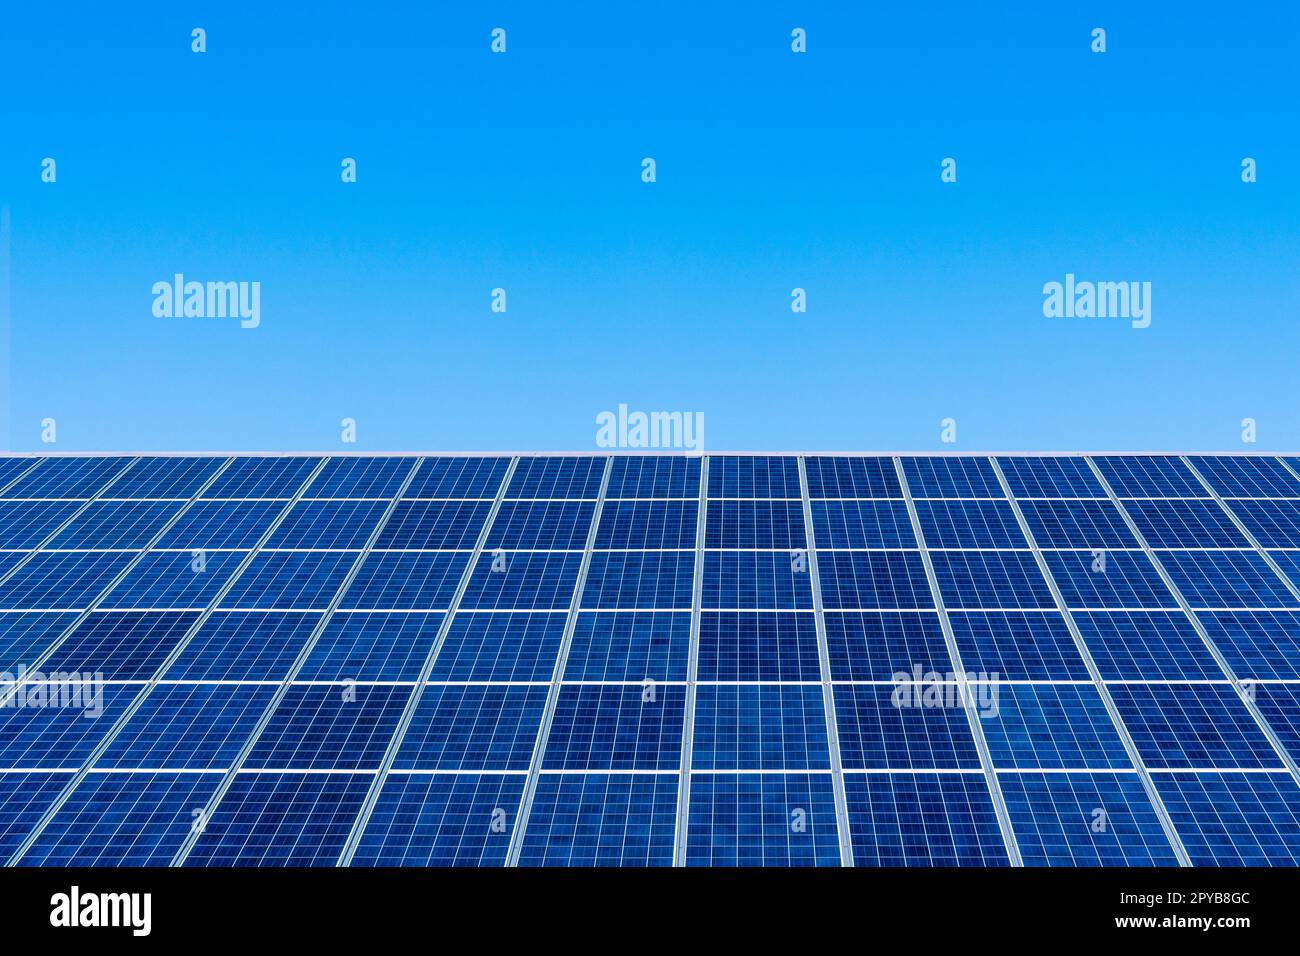 Solar panel on clear blue sky background Stock Photo